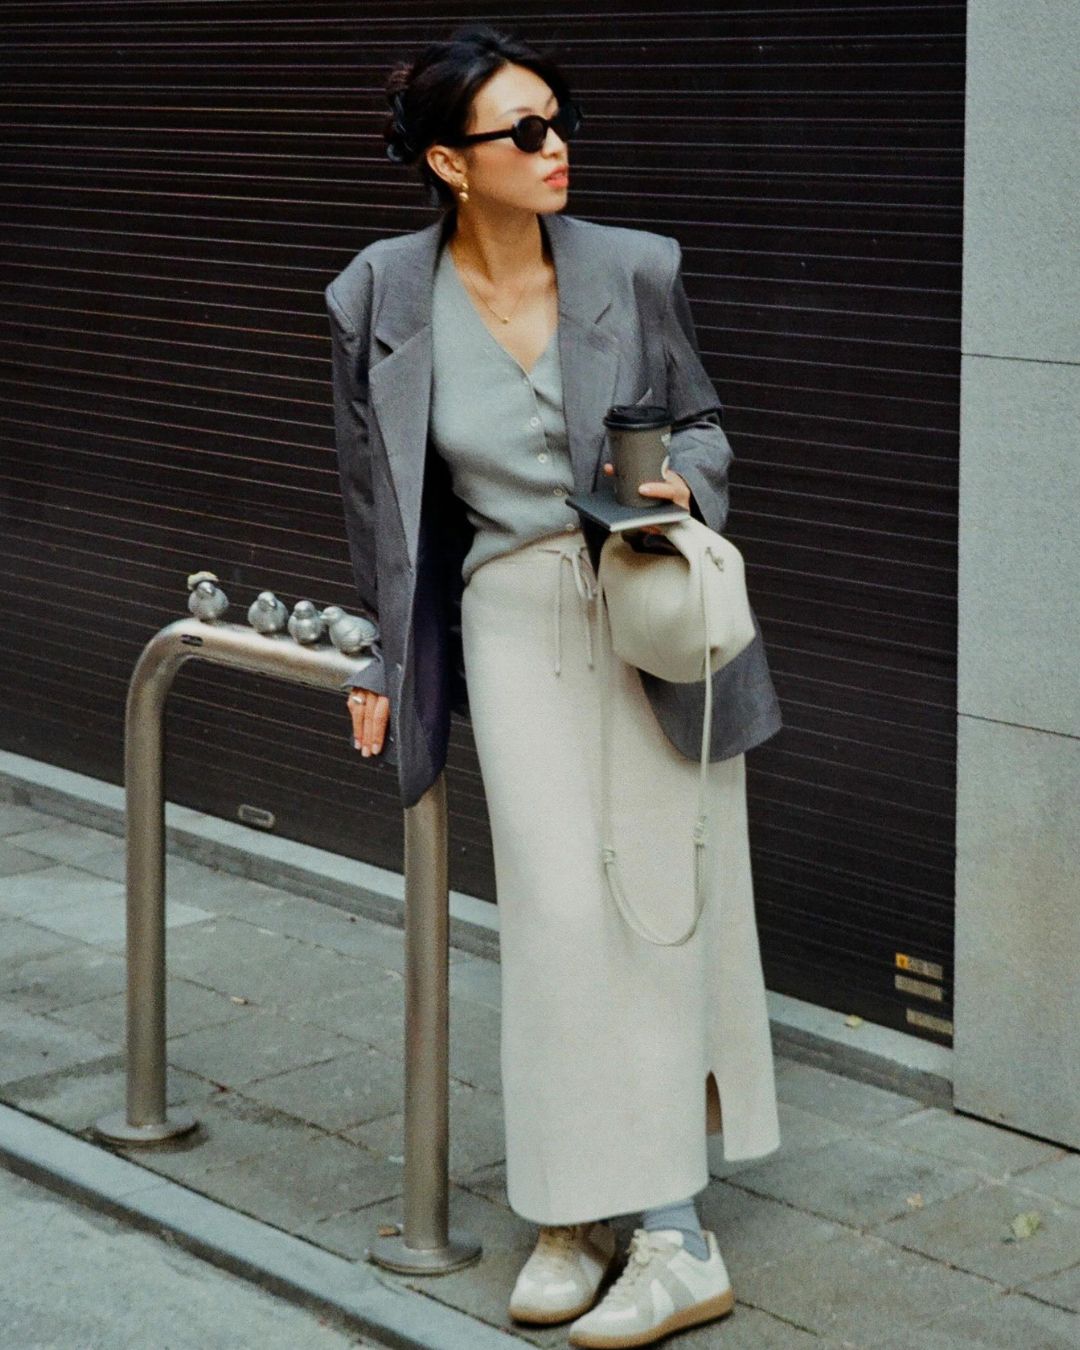 Influencer wears a grey blazer with a maxi skirt and vest.